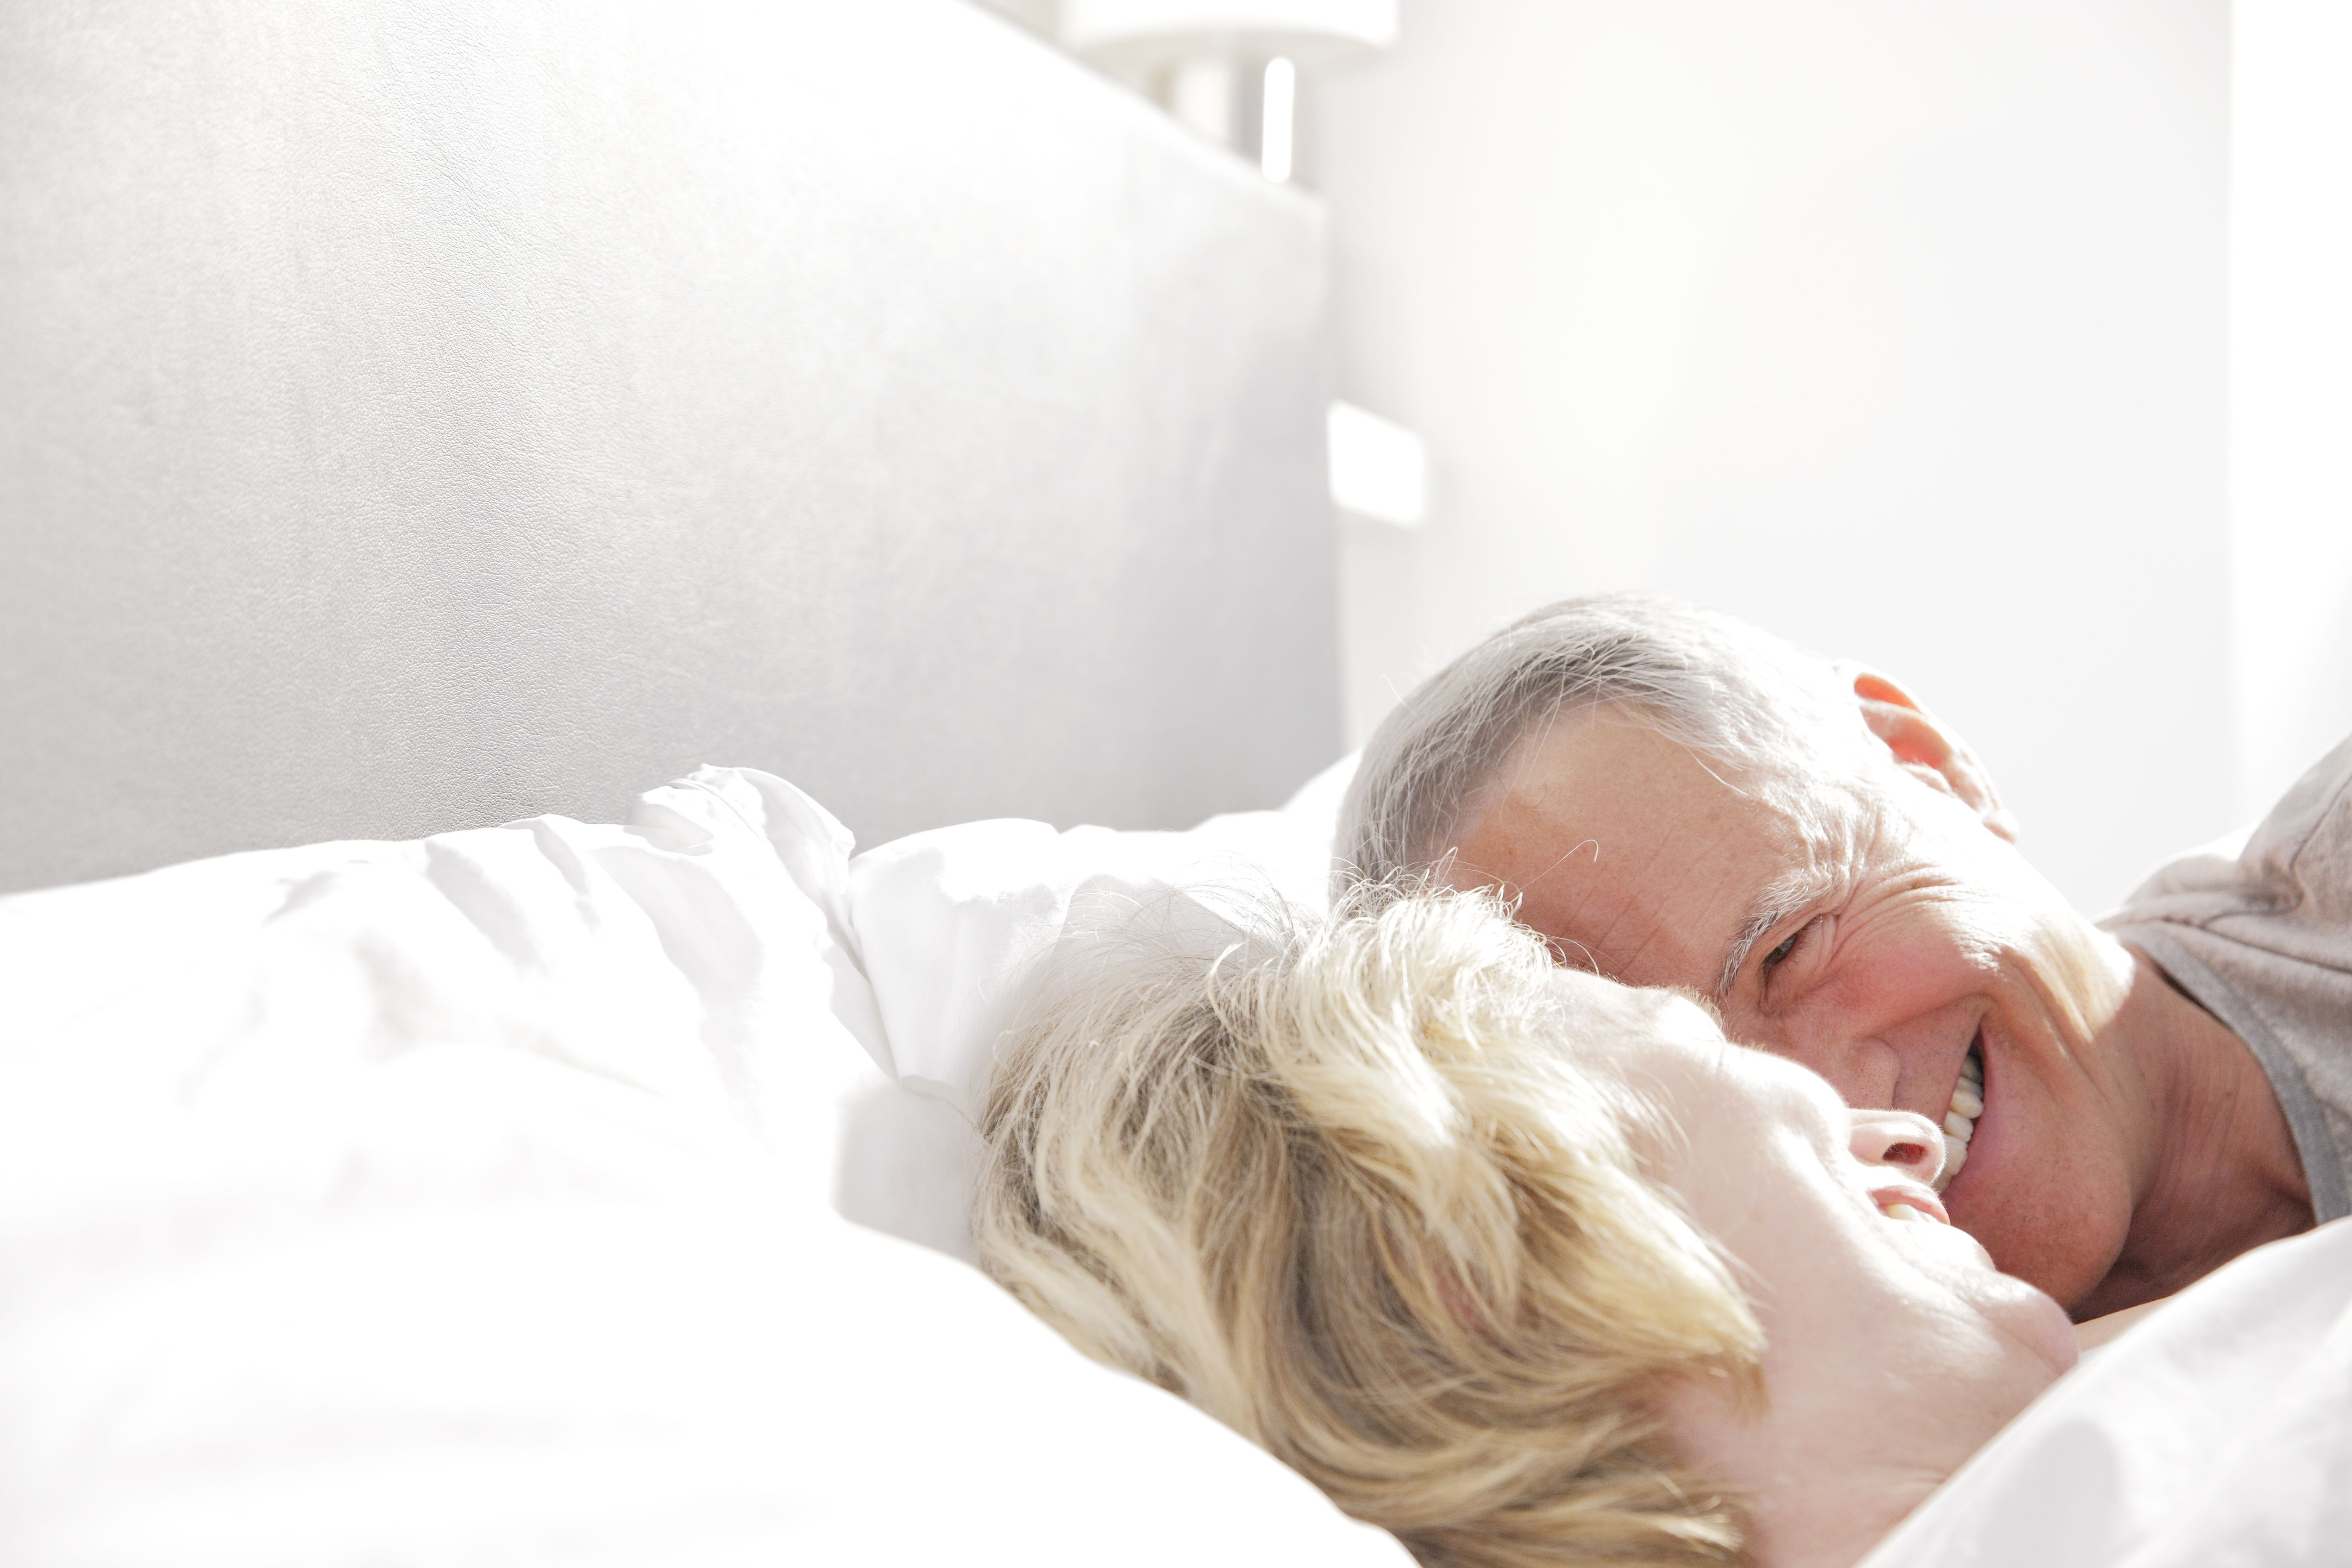 A Urologist Shared 8 Tips for Having Great Sex Over the Age of 50